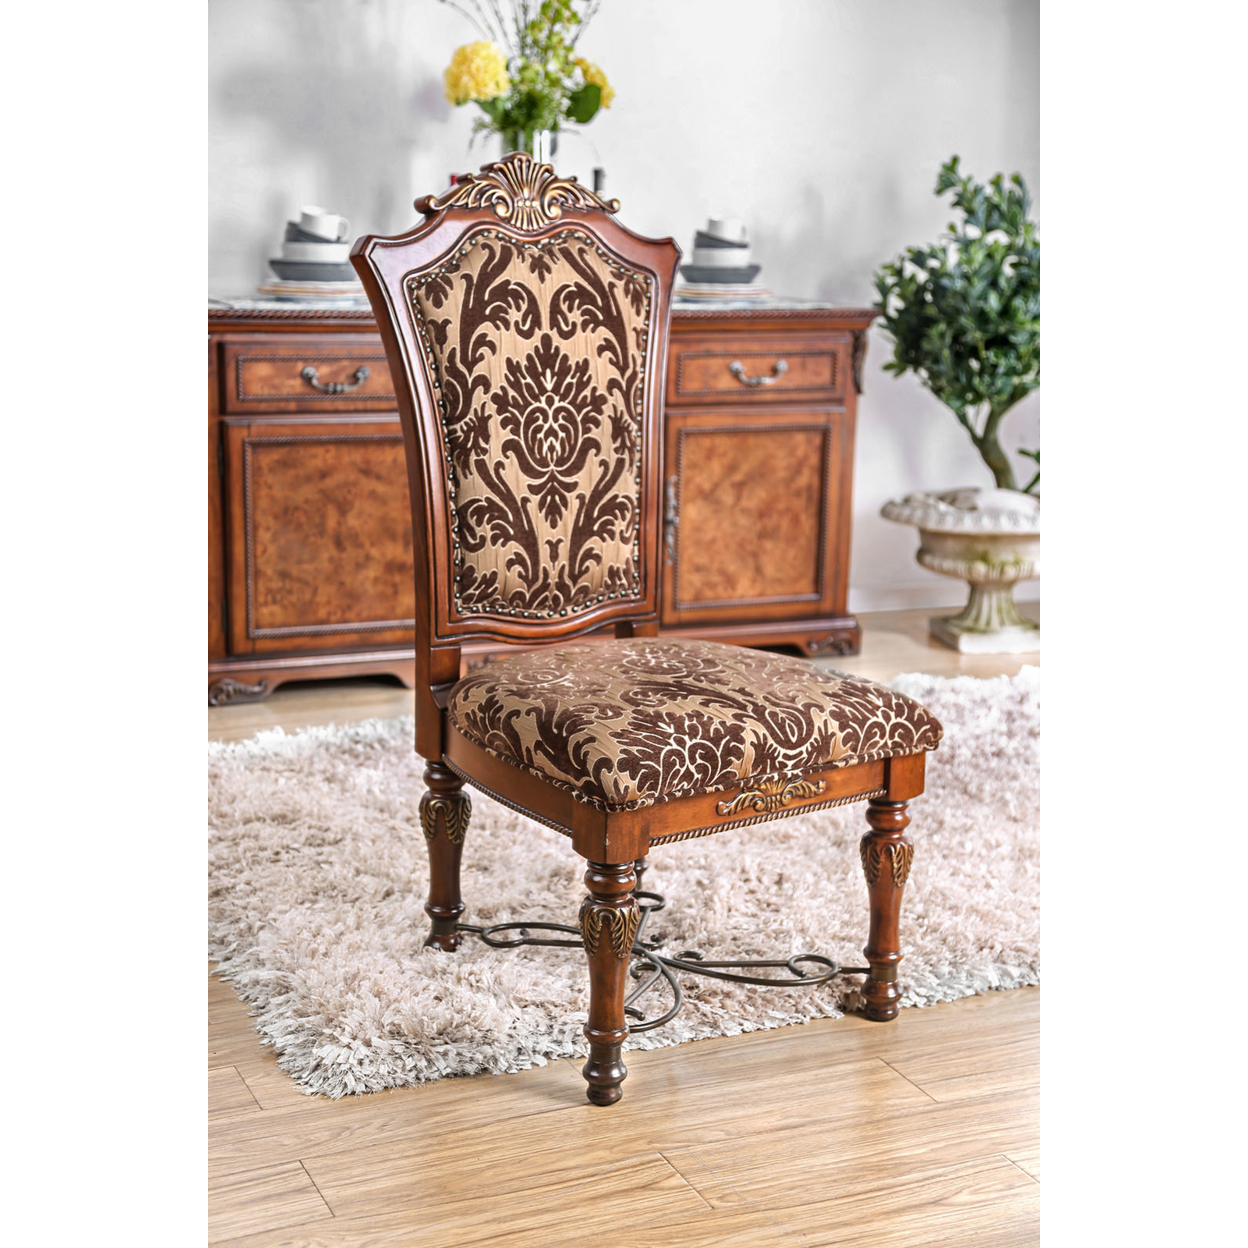 Wooden Fabric Upholstered Side Chair With Floral Print, Brown, Pack Of Two- Saltoro Sherpi